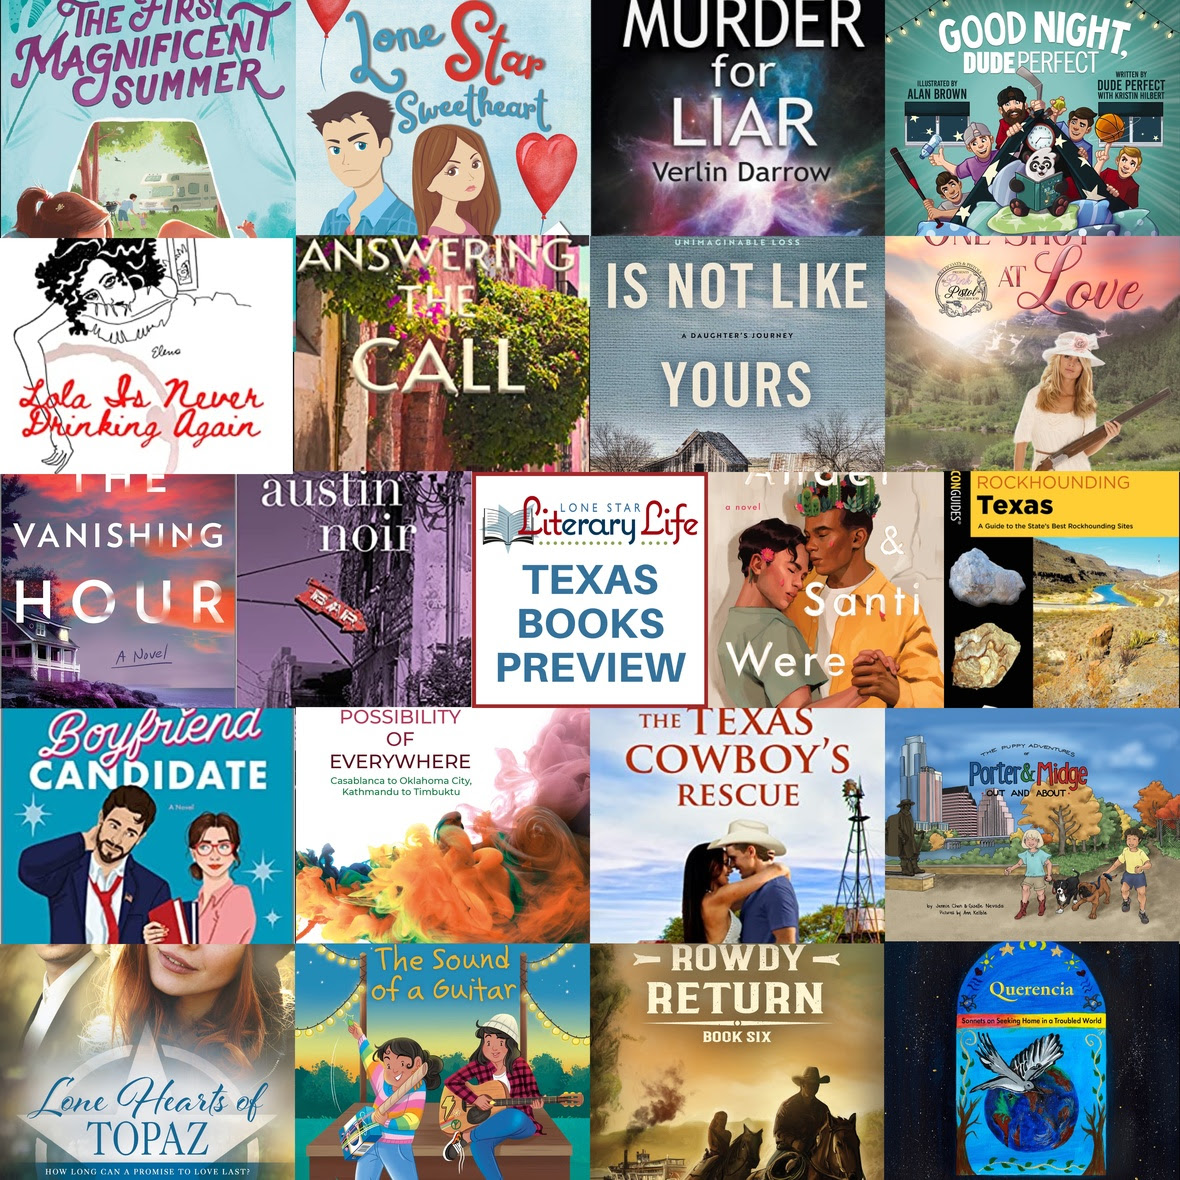 02.1a May 23 Texas Books Preview Montage